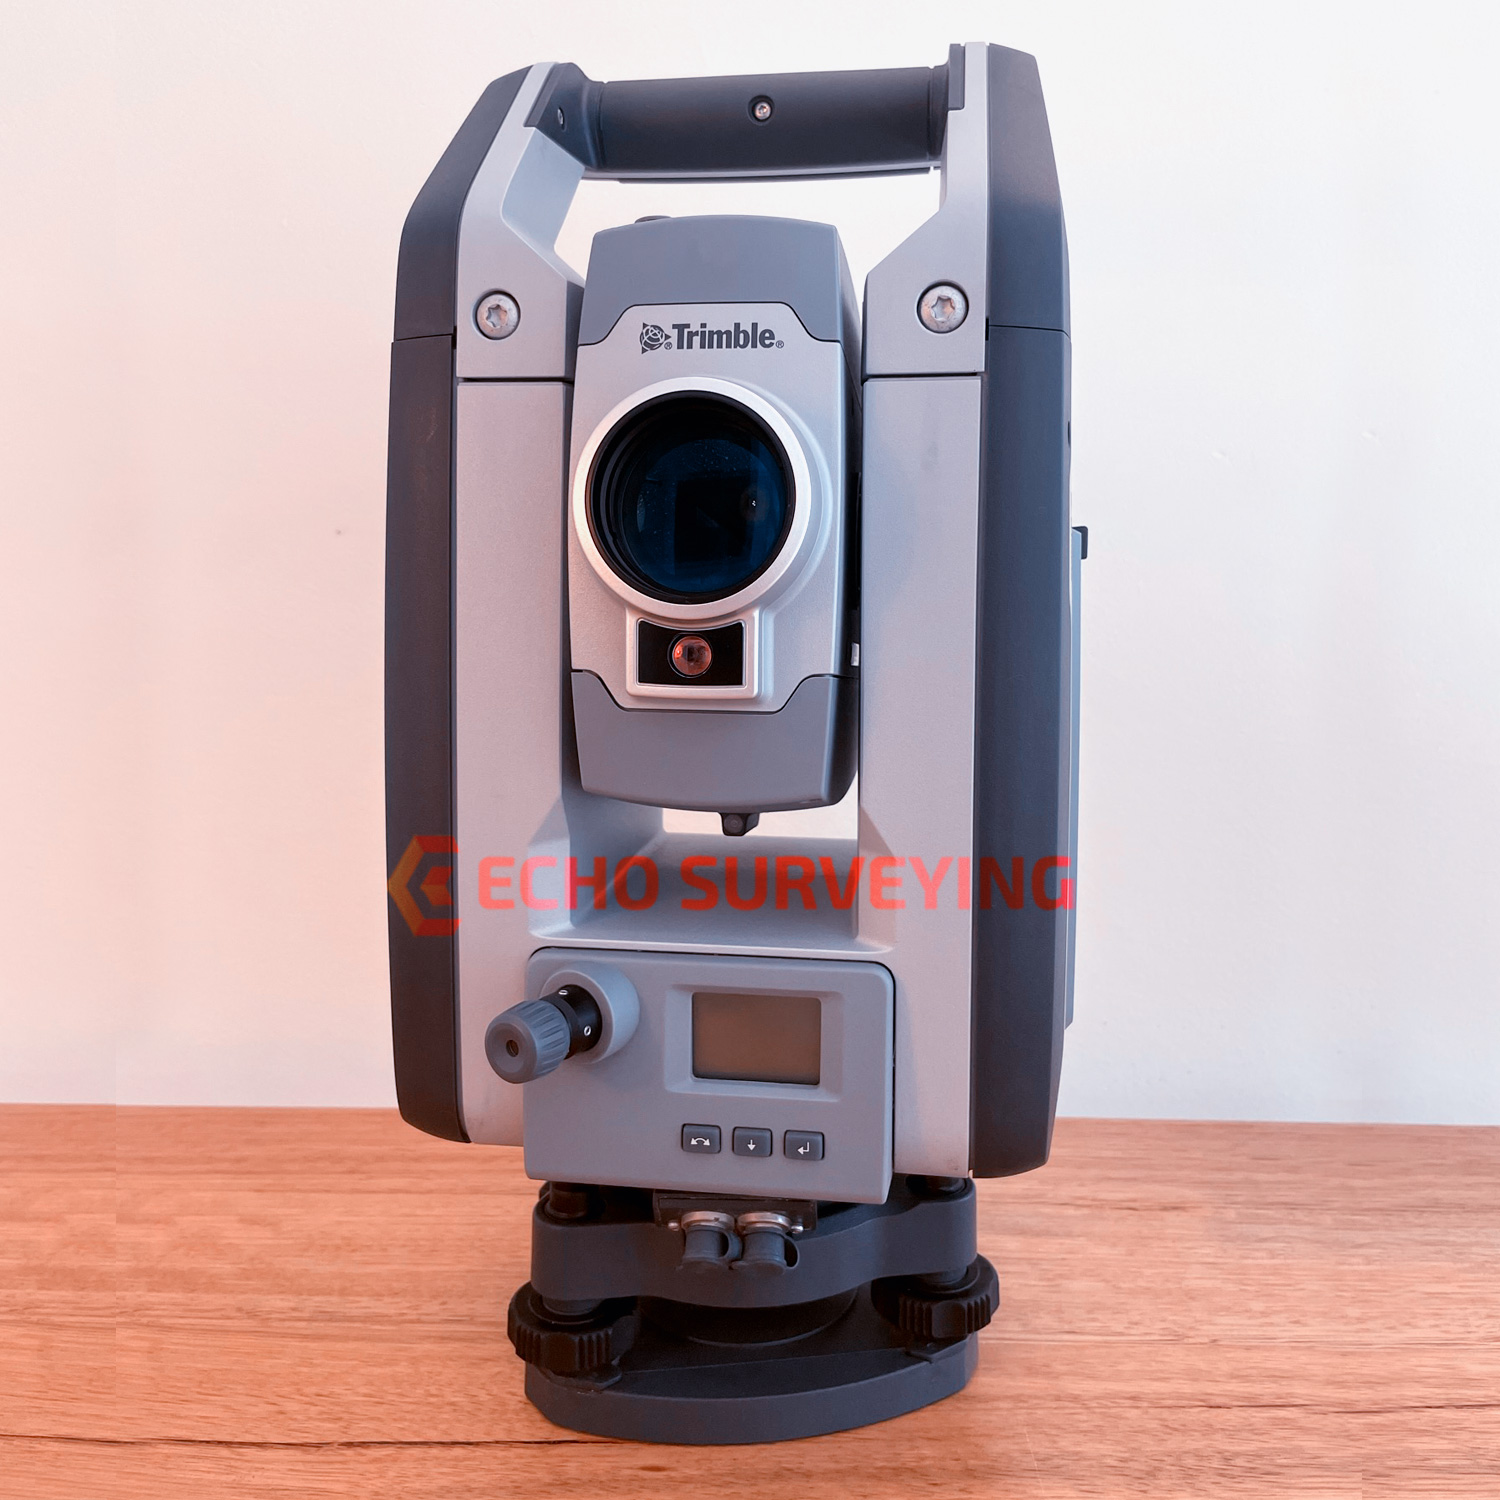 Used-Trimble-S9-1-DR-HP-Robotic-Total-Station.jpg